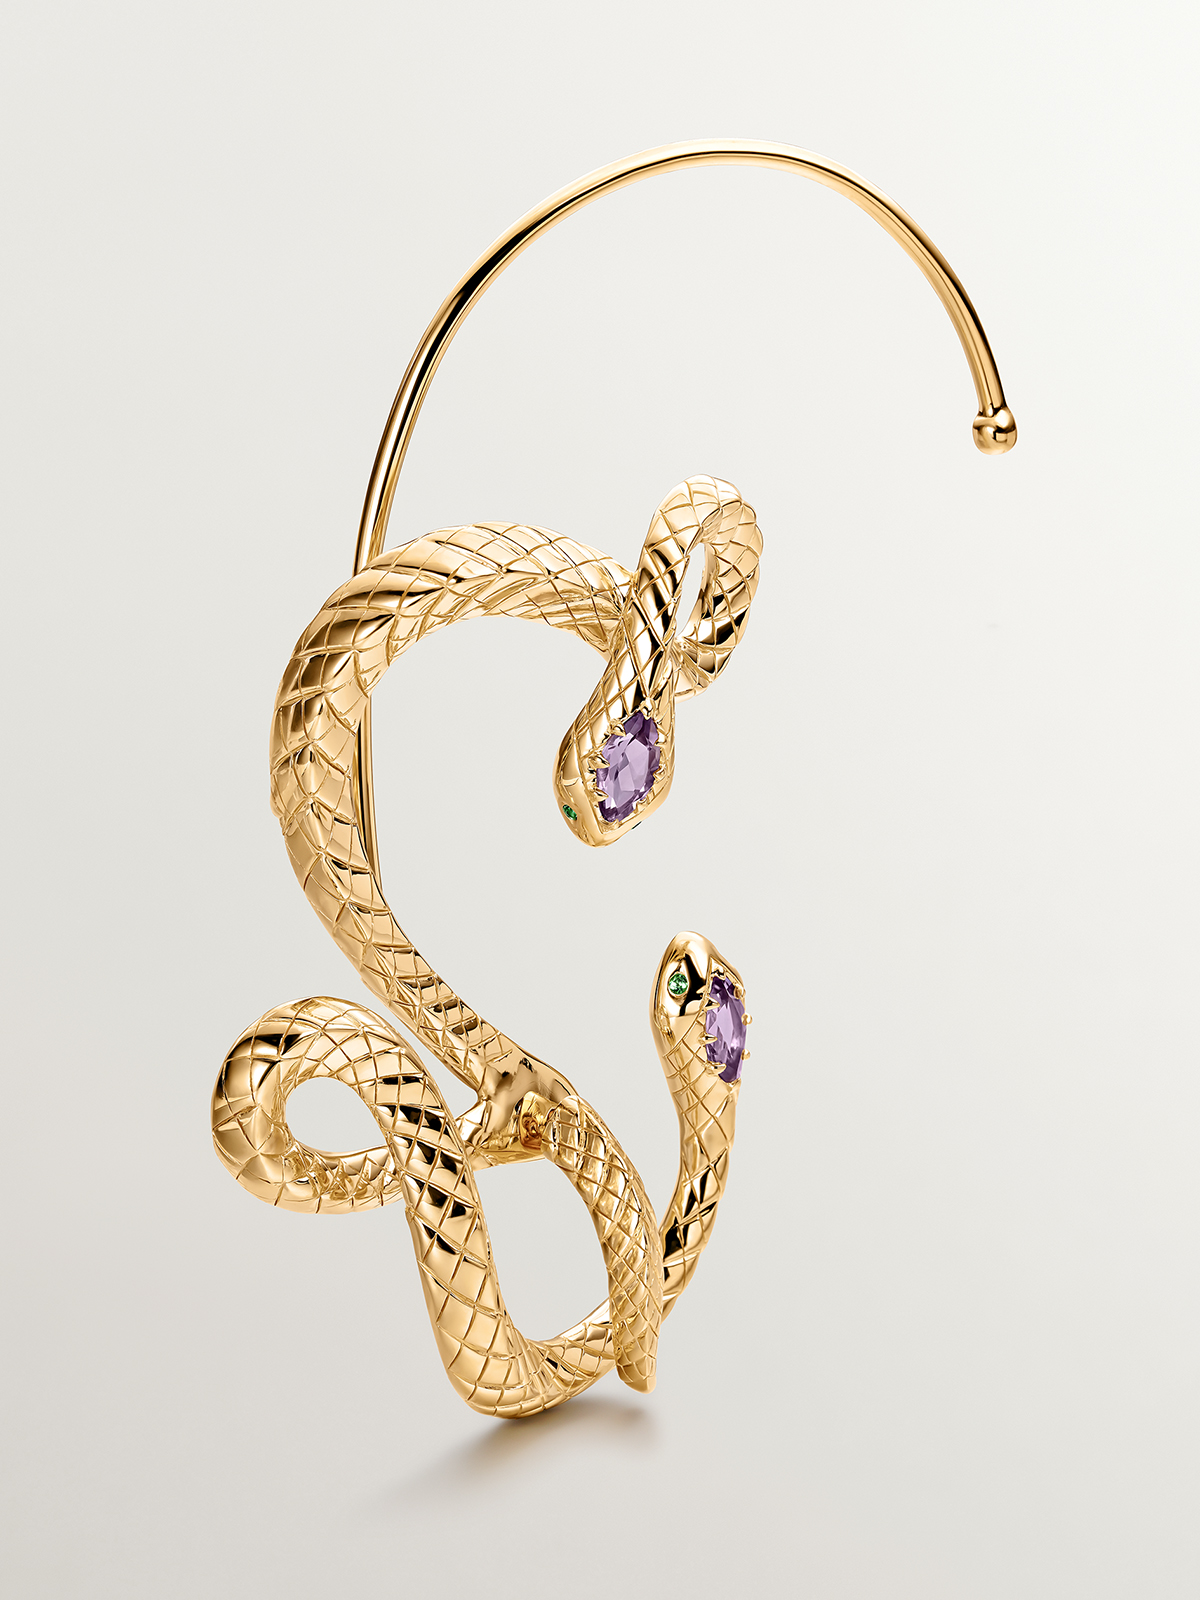 925 Sterling silver earcuff plated in 18K yellow gold with a snake design, amethyst and tsavorite.